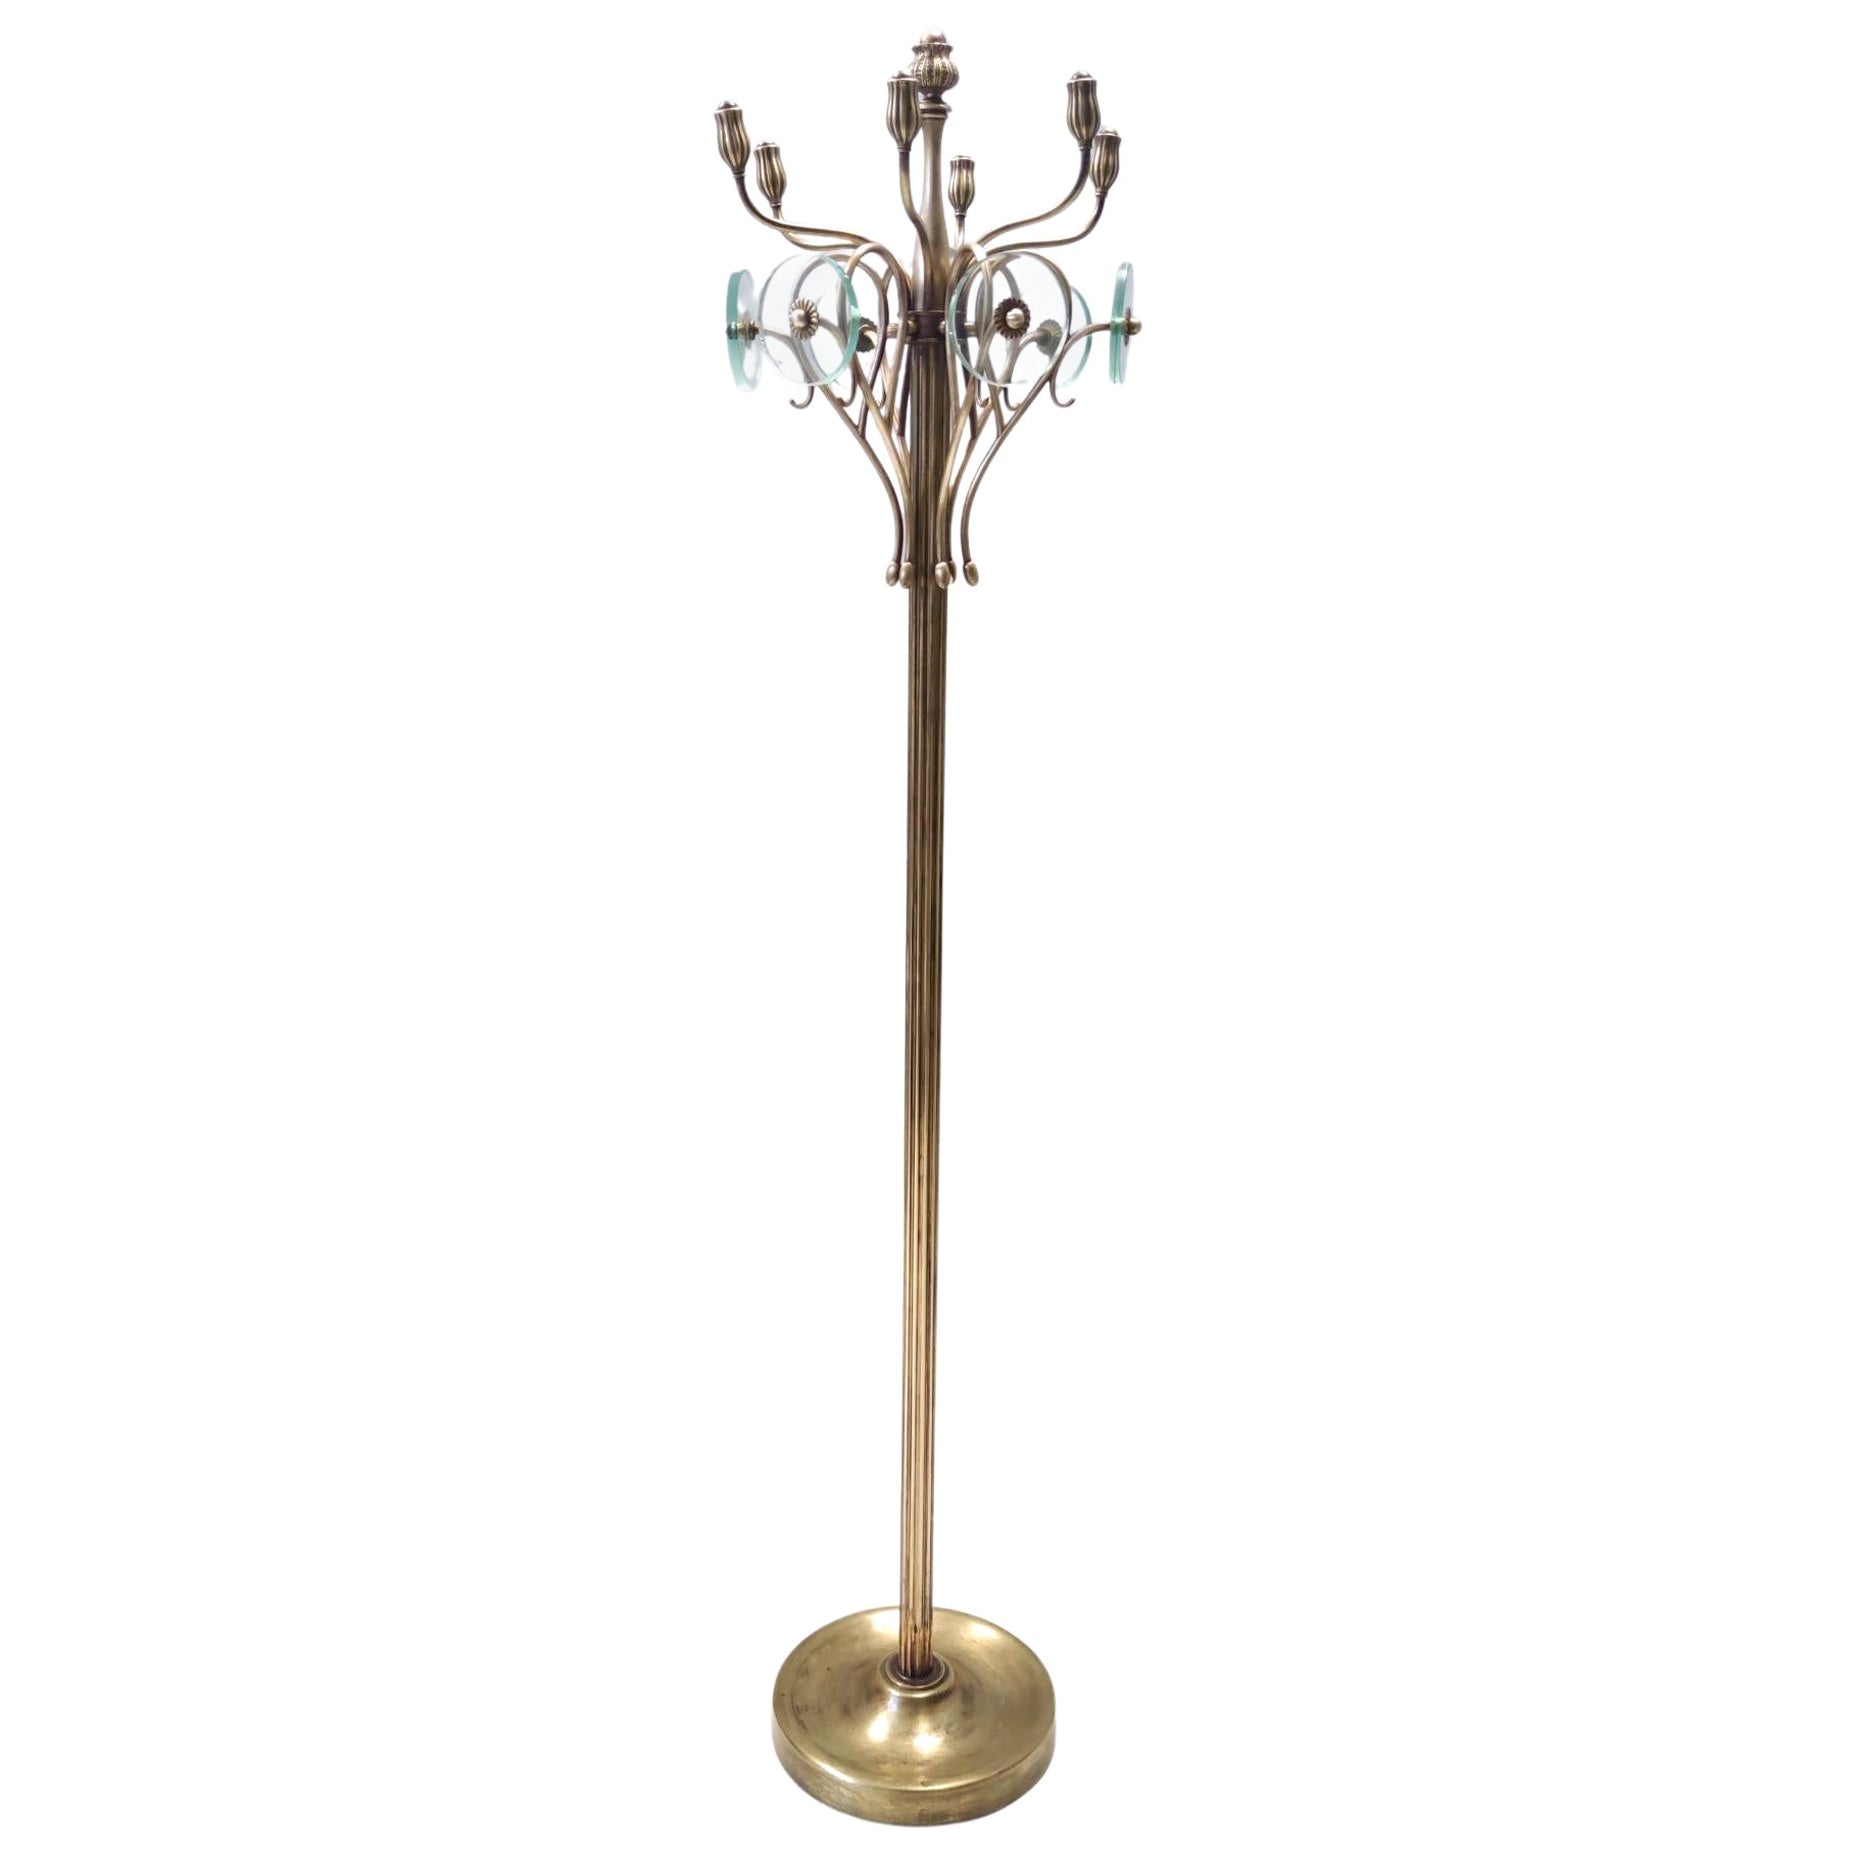 Vintage Revolving Brass and Glass Coat Rack Ascribable to Fontana Arte, Italy